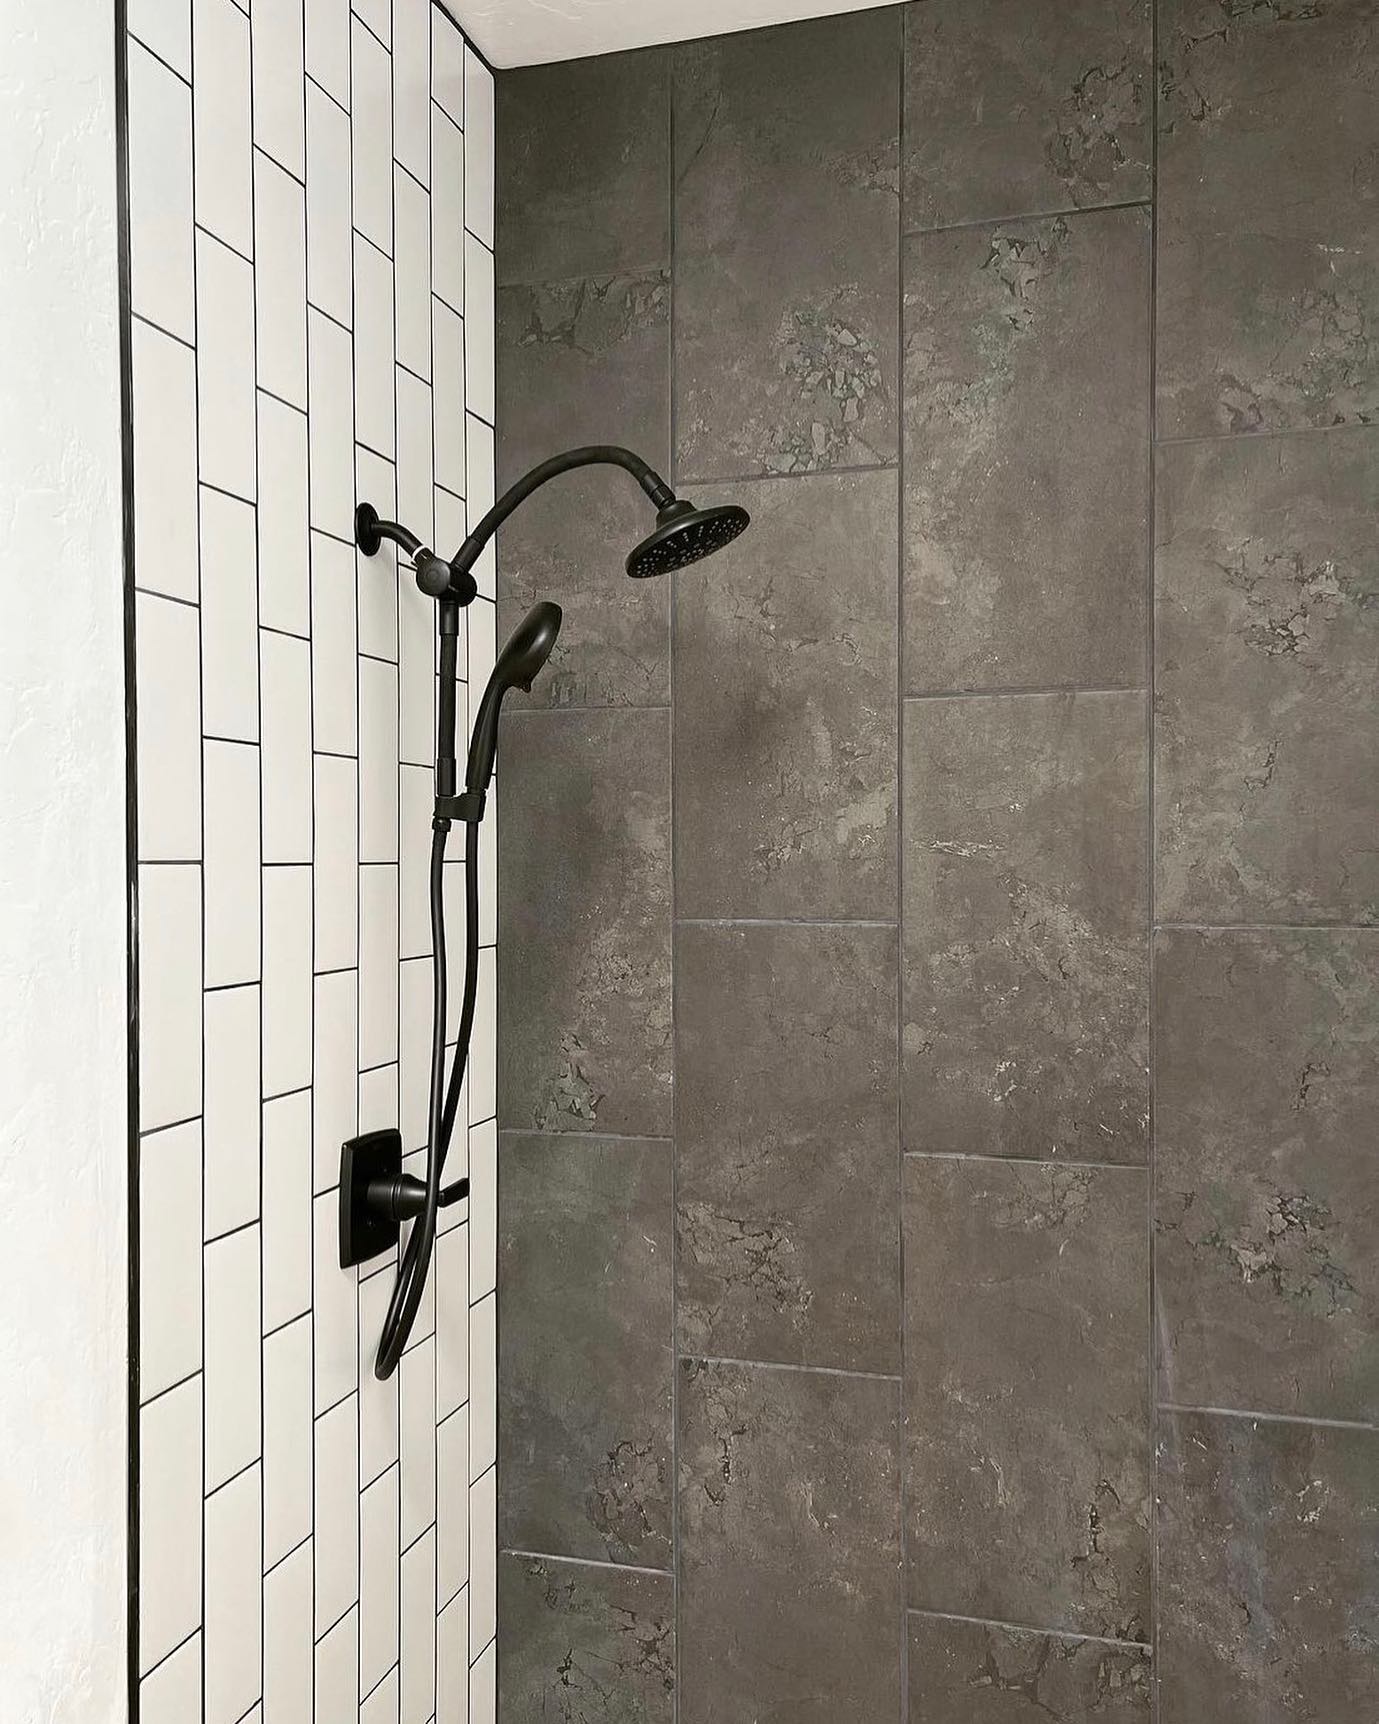 Great tile selects & install by @poplinconstructiontucson 👌🏼featuring our concrete look Newport series, in the color Pier, and Flex - one of our many classic subway series in White. #emsertile #showerdesign